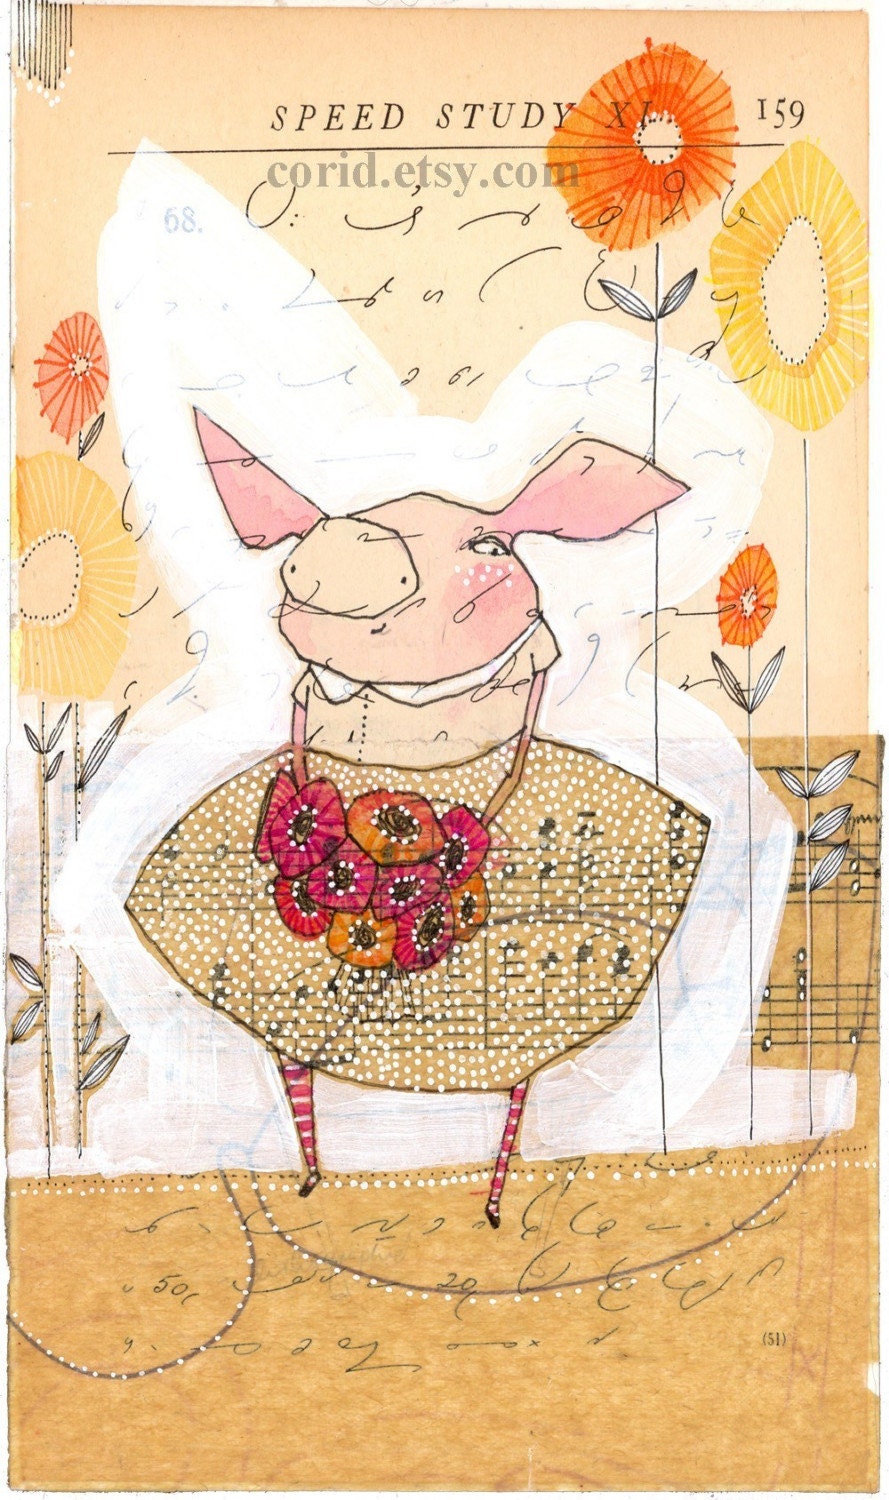 this little piggy... a 4 x 7 inch archival small print